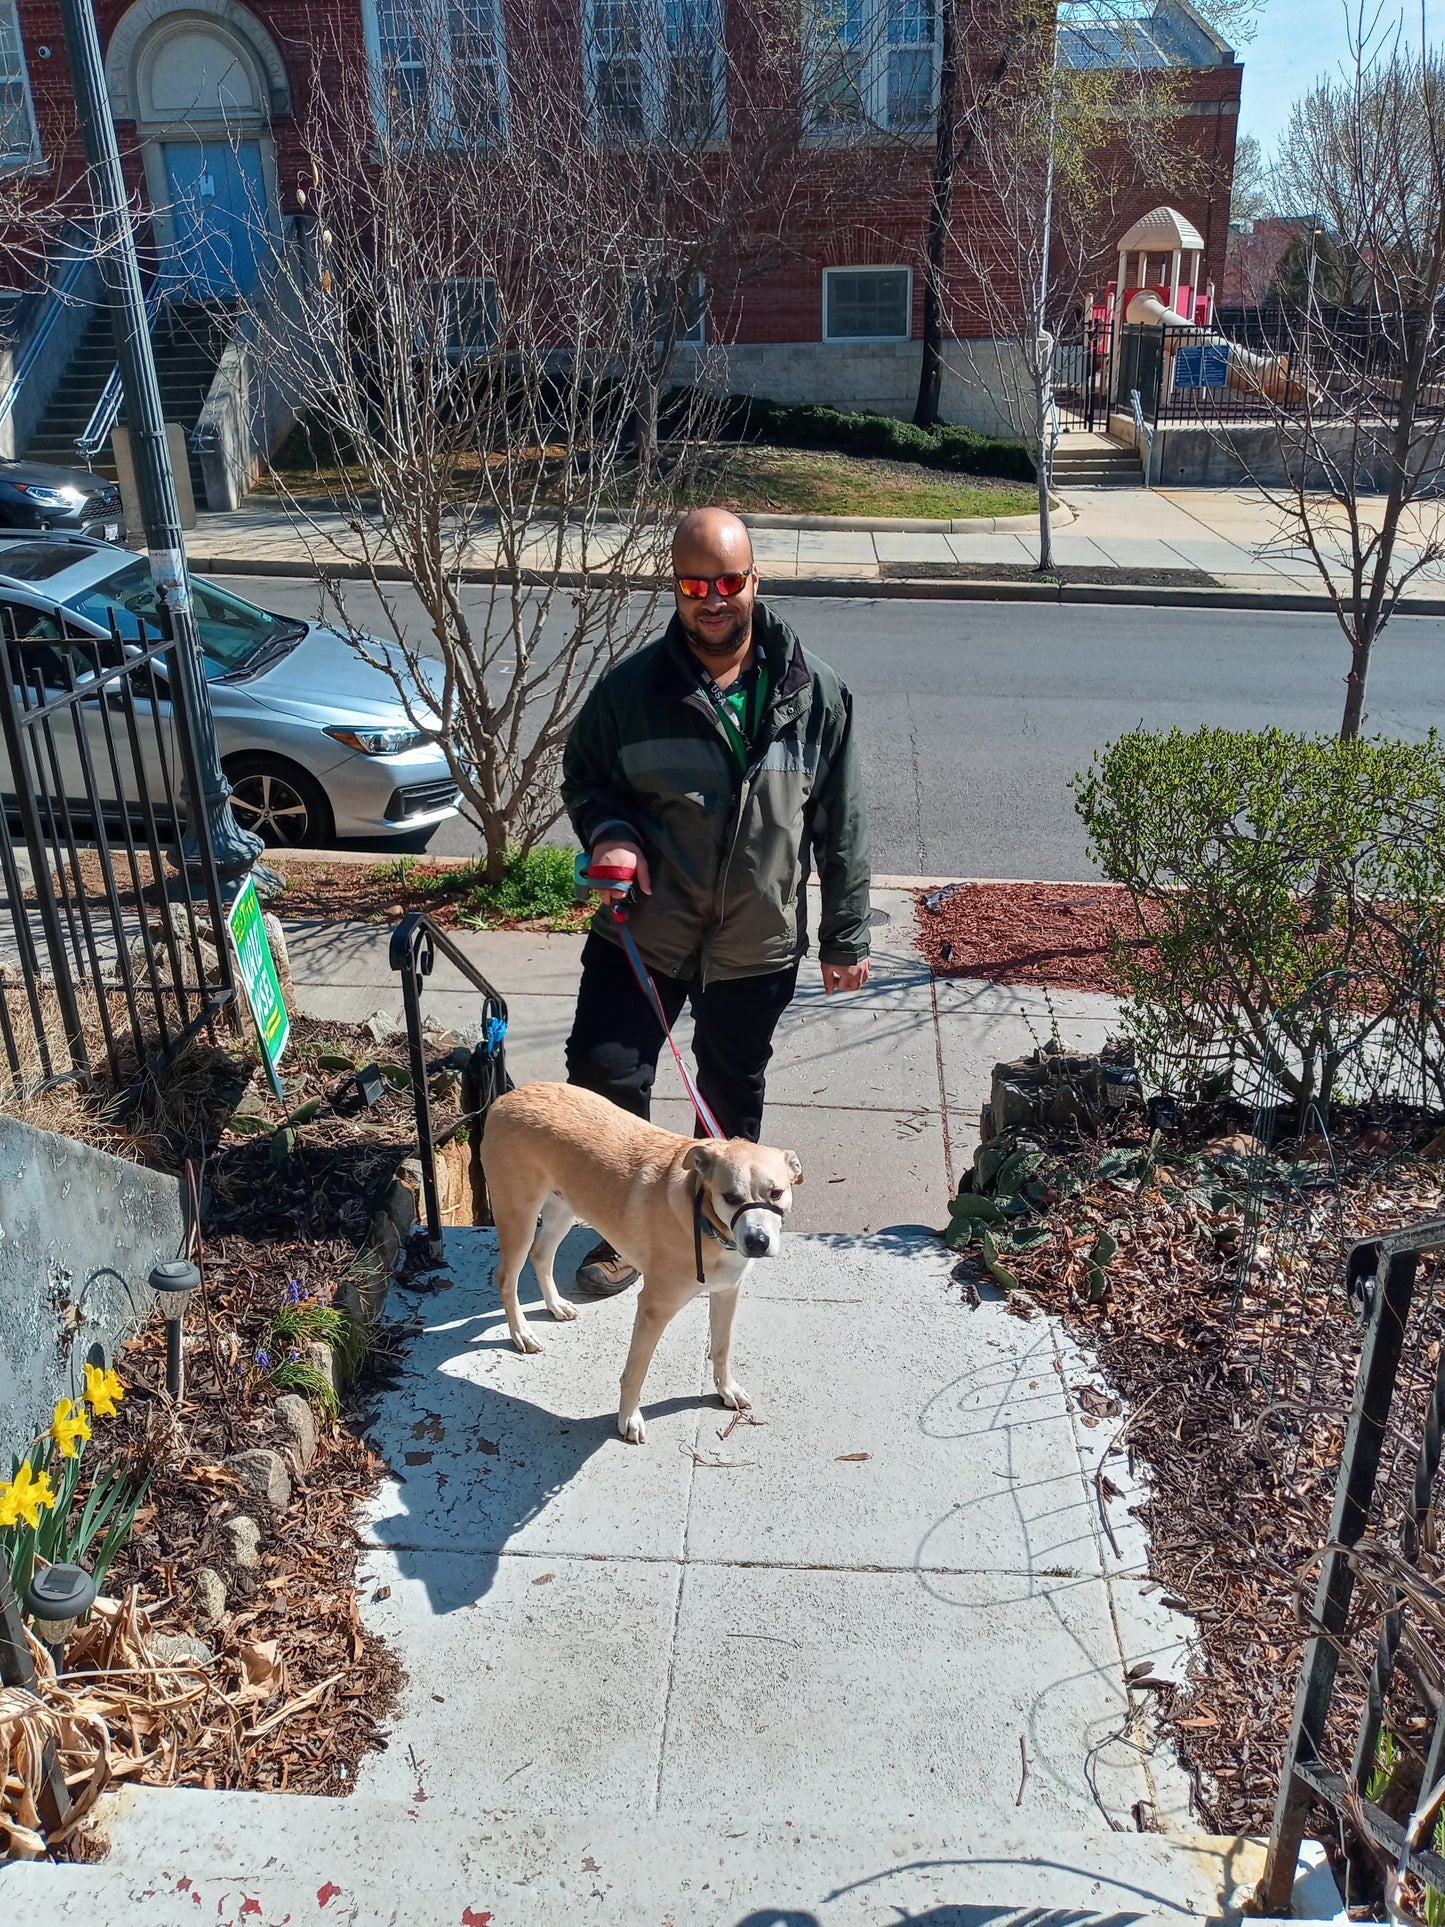 Mid-day Dog Walking Services (Select Neighborhoods in Northeast DC Only)